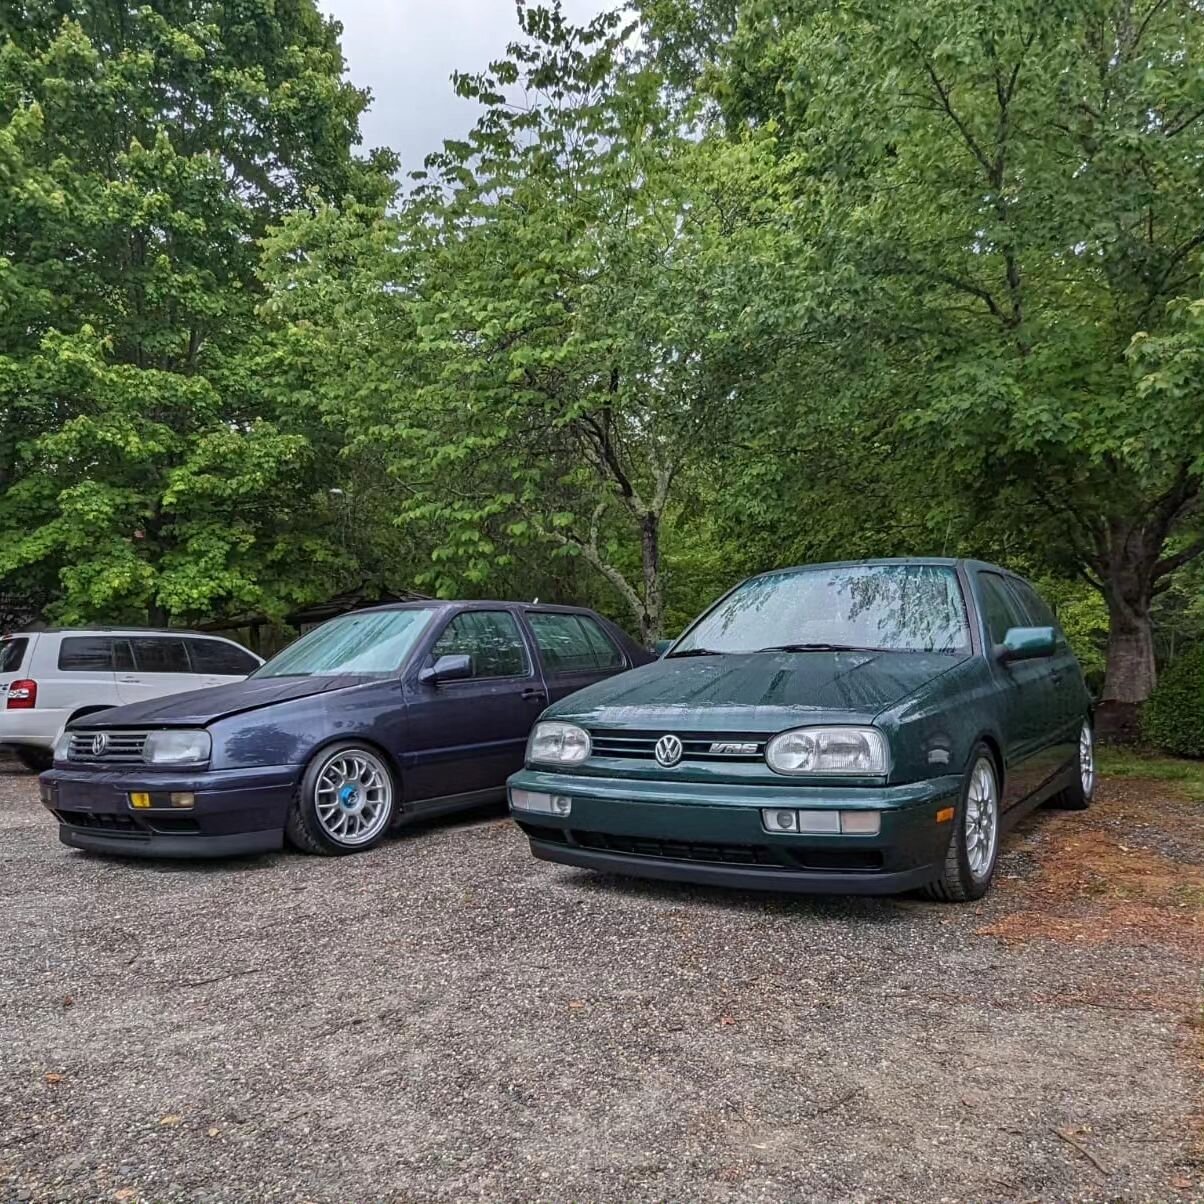 Some pics from @connormccann @eastcoastmk3 gtg hosted by @biturbos4 thanks for everyone  that came out and hang out at the gtg......#burnallthemk3s #vw #mk3love #mk3madness #mk3gti #mk3golf #mk3jetta #mk3vr6 #mk3aba #mk3cabrio #mk3lovers #mk3nation #